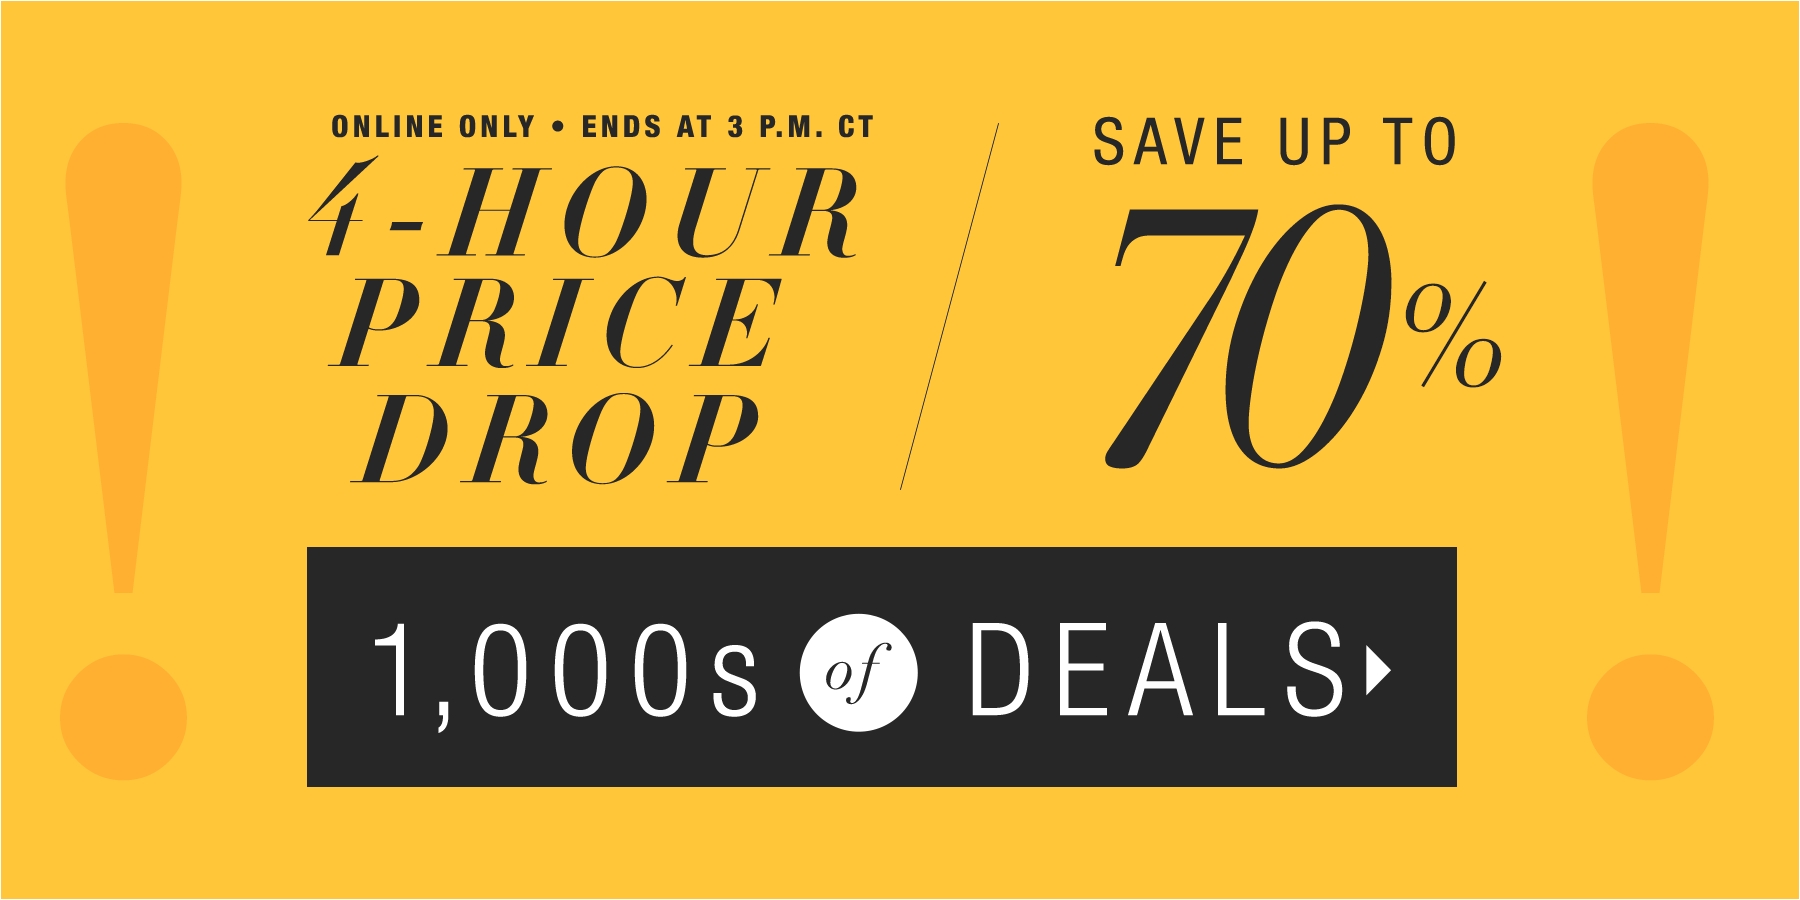 online only ends at 3 p m ct up to 70 off 1000s